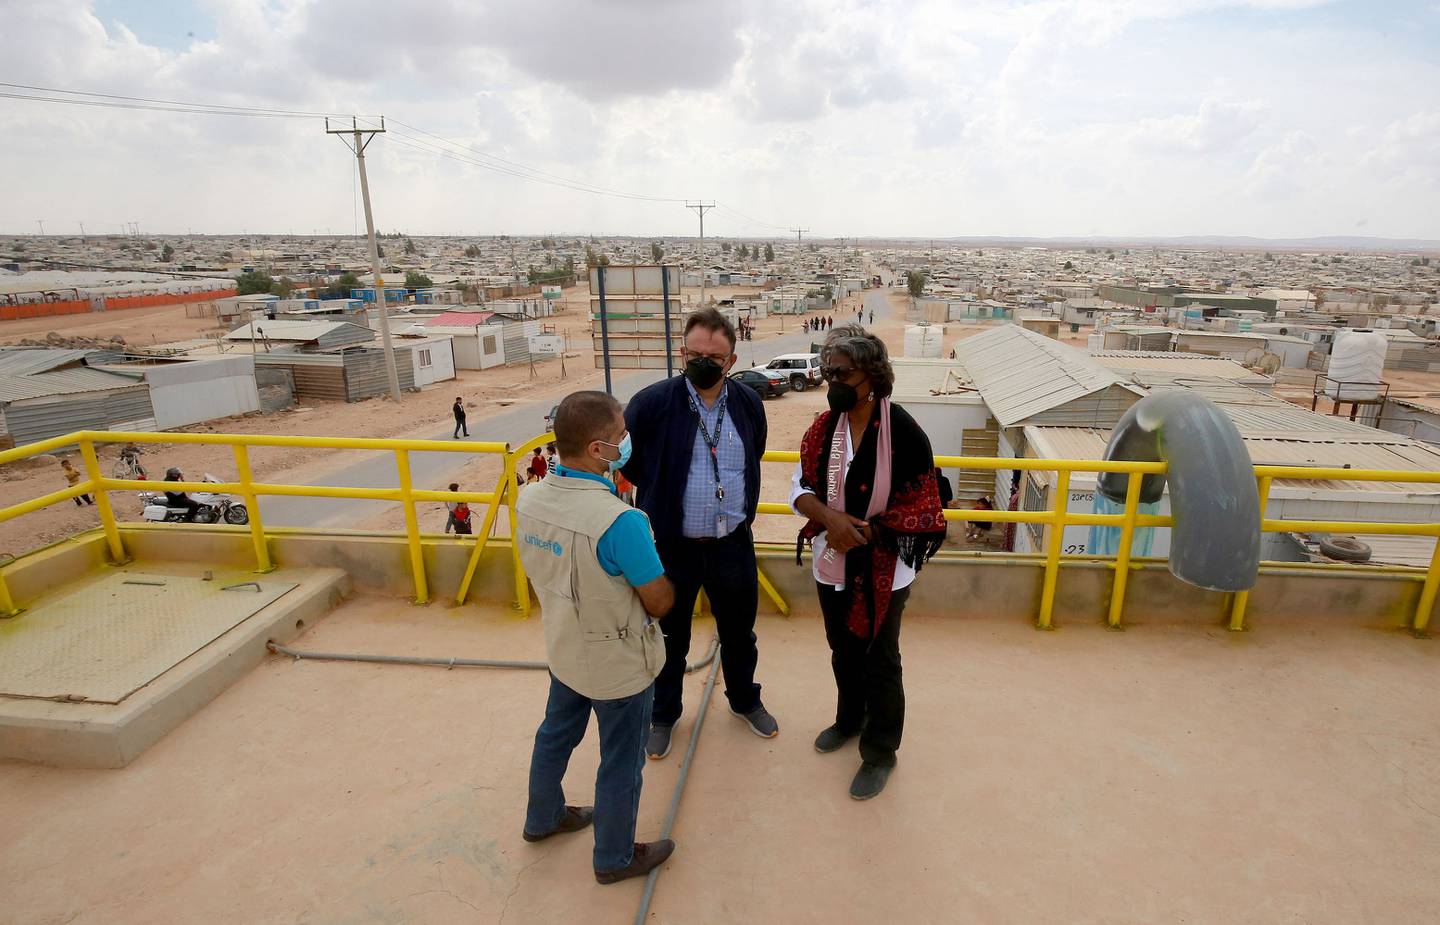 US ambassador to the UN Linda Thomas-Greenfield, right, visits the Zaatari camp for Syrian refugees in Jordan. AFP